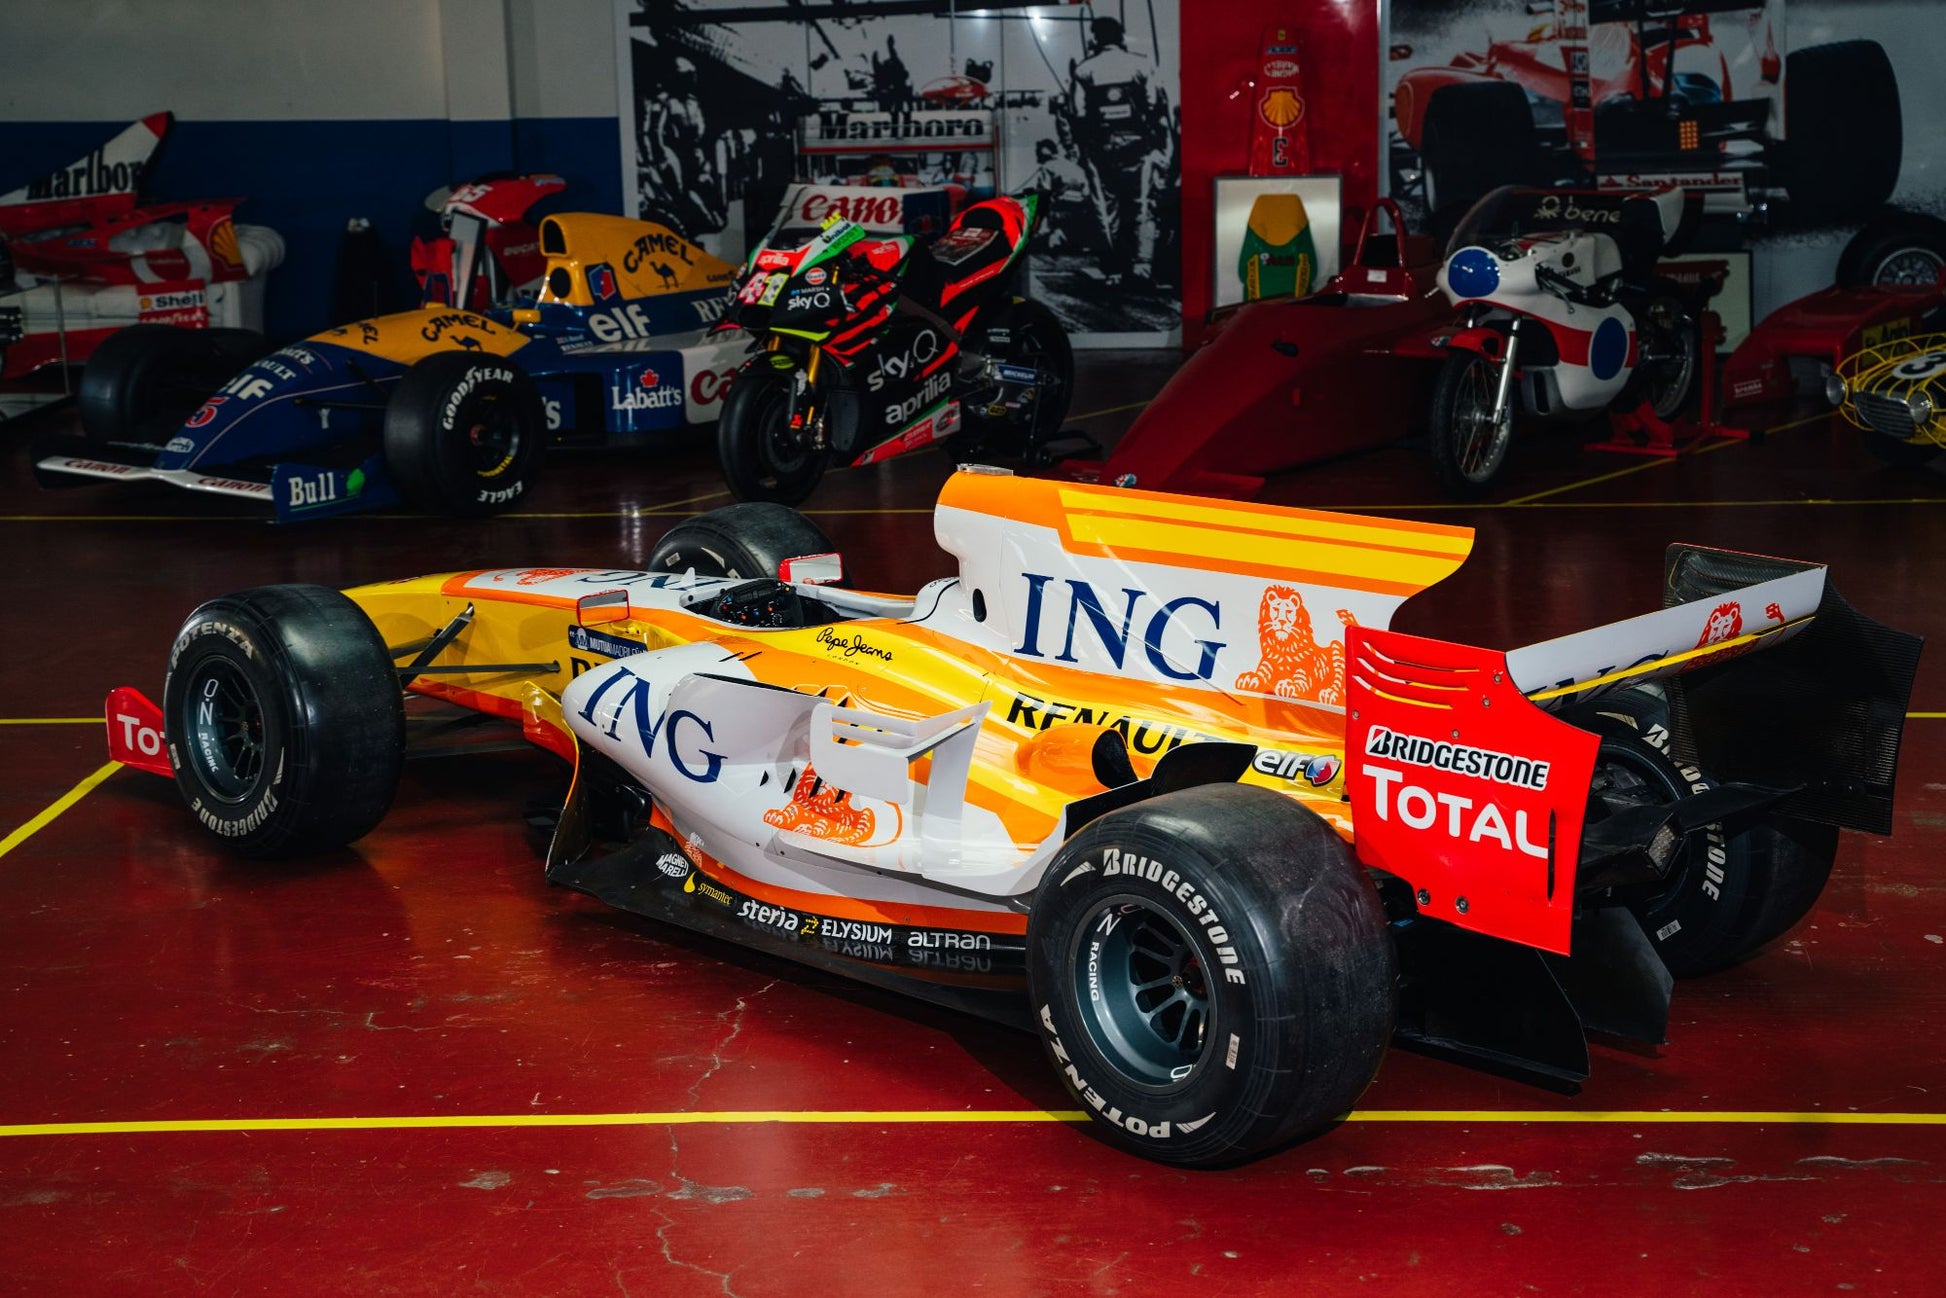 F1 RENAULT R29 ROLLING CHASSIS - TheArsenale